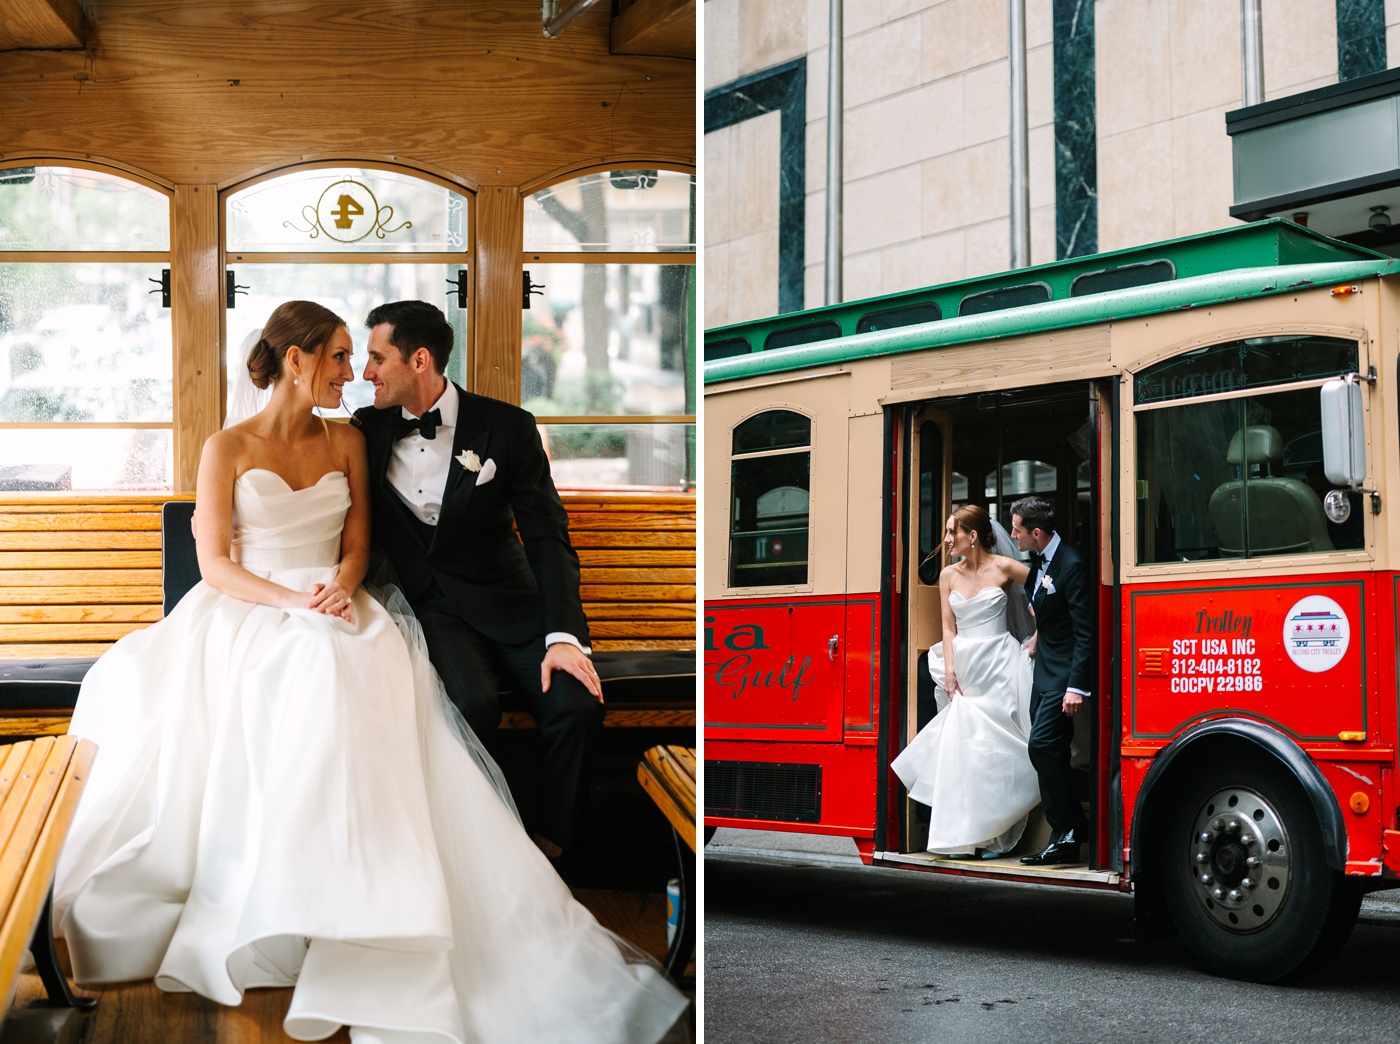 Bride and groom posing on a vintage trolley for their downtown Chicago wedding